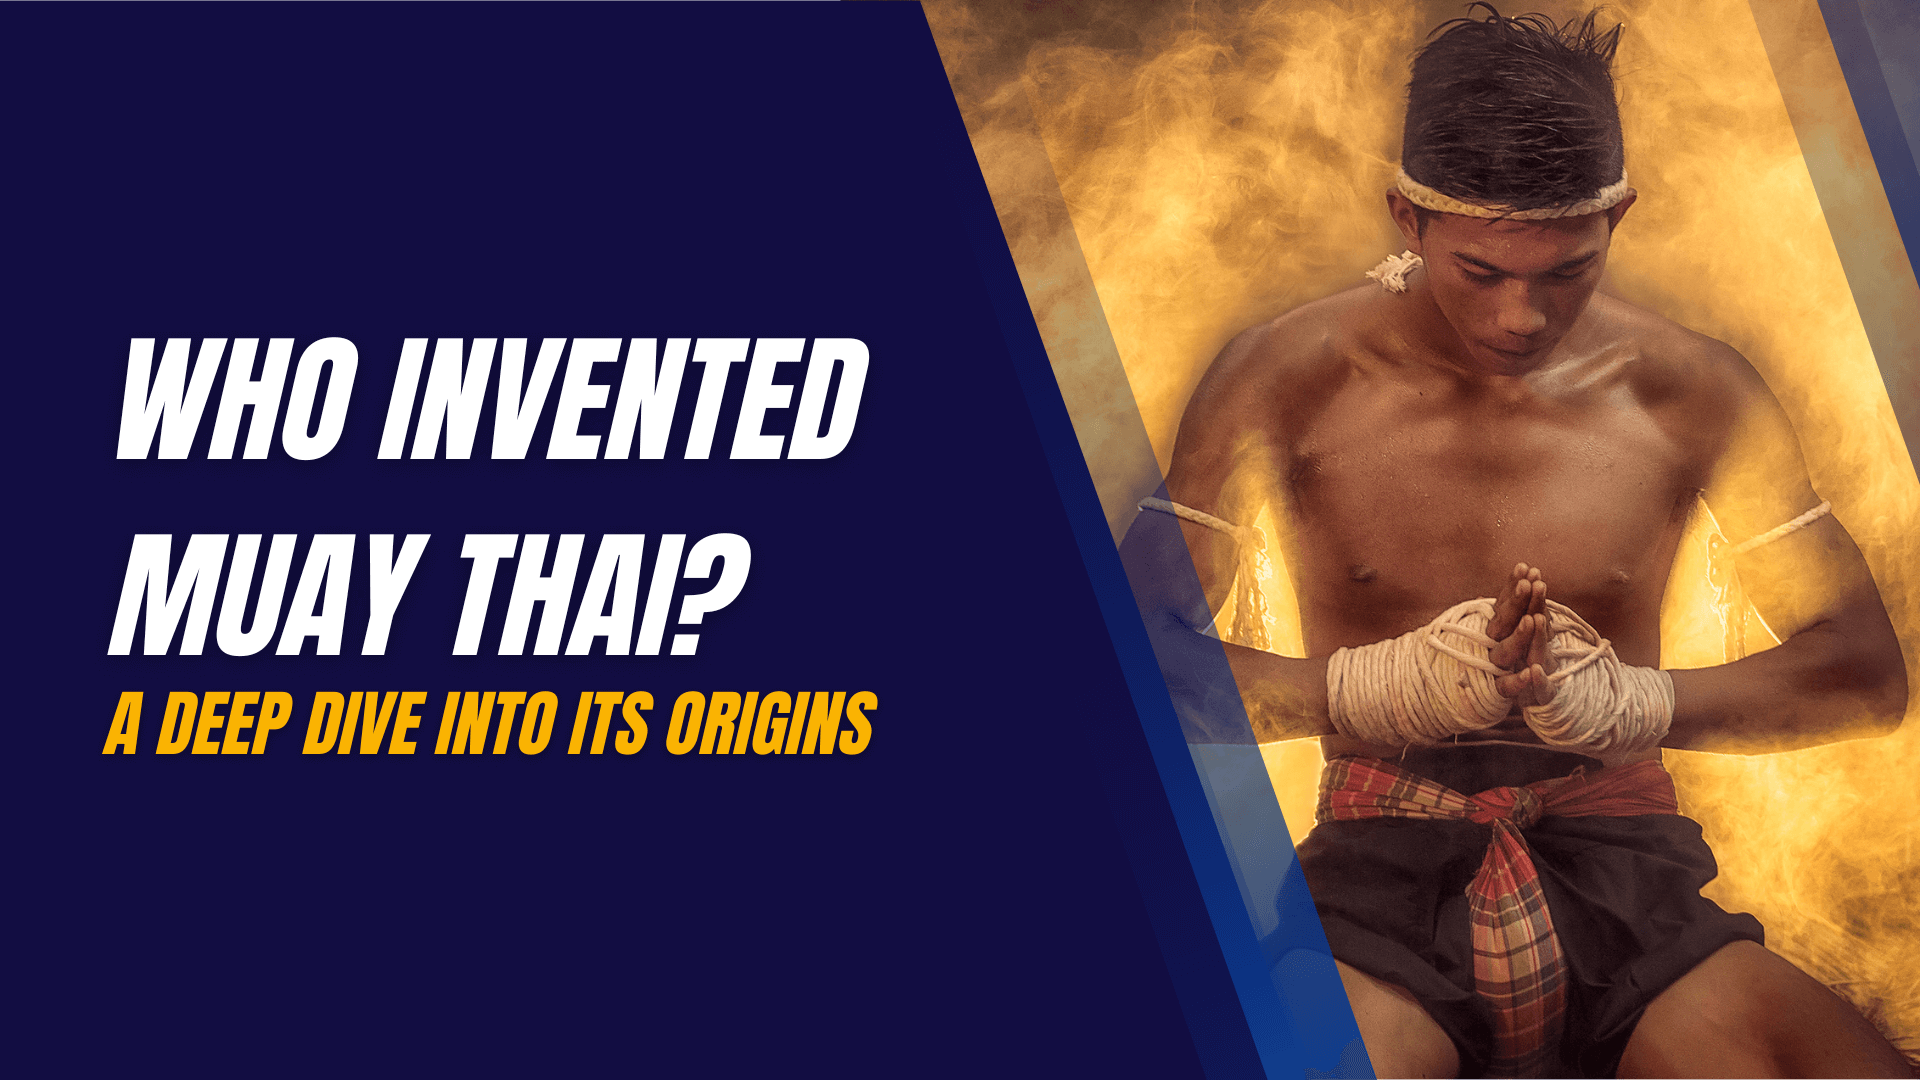 Who Invented Muay Thai? A Deep Dive into Its Origins